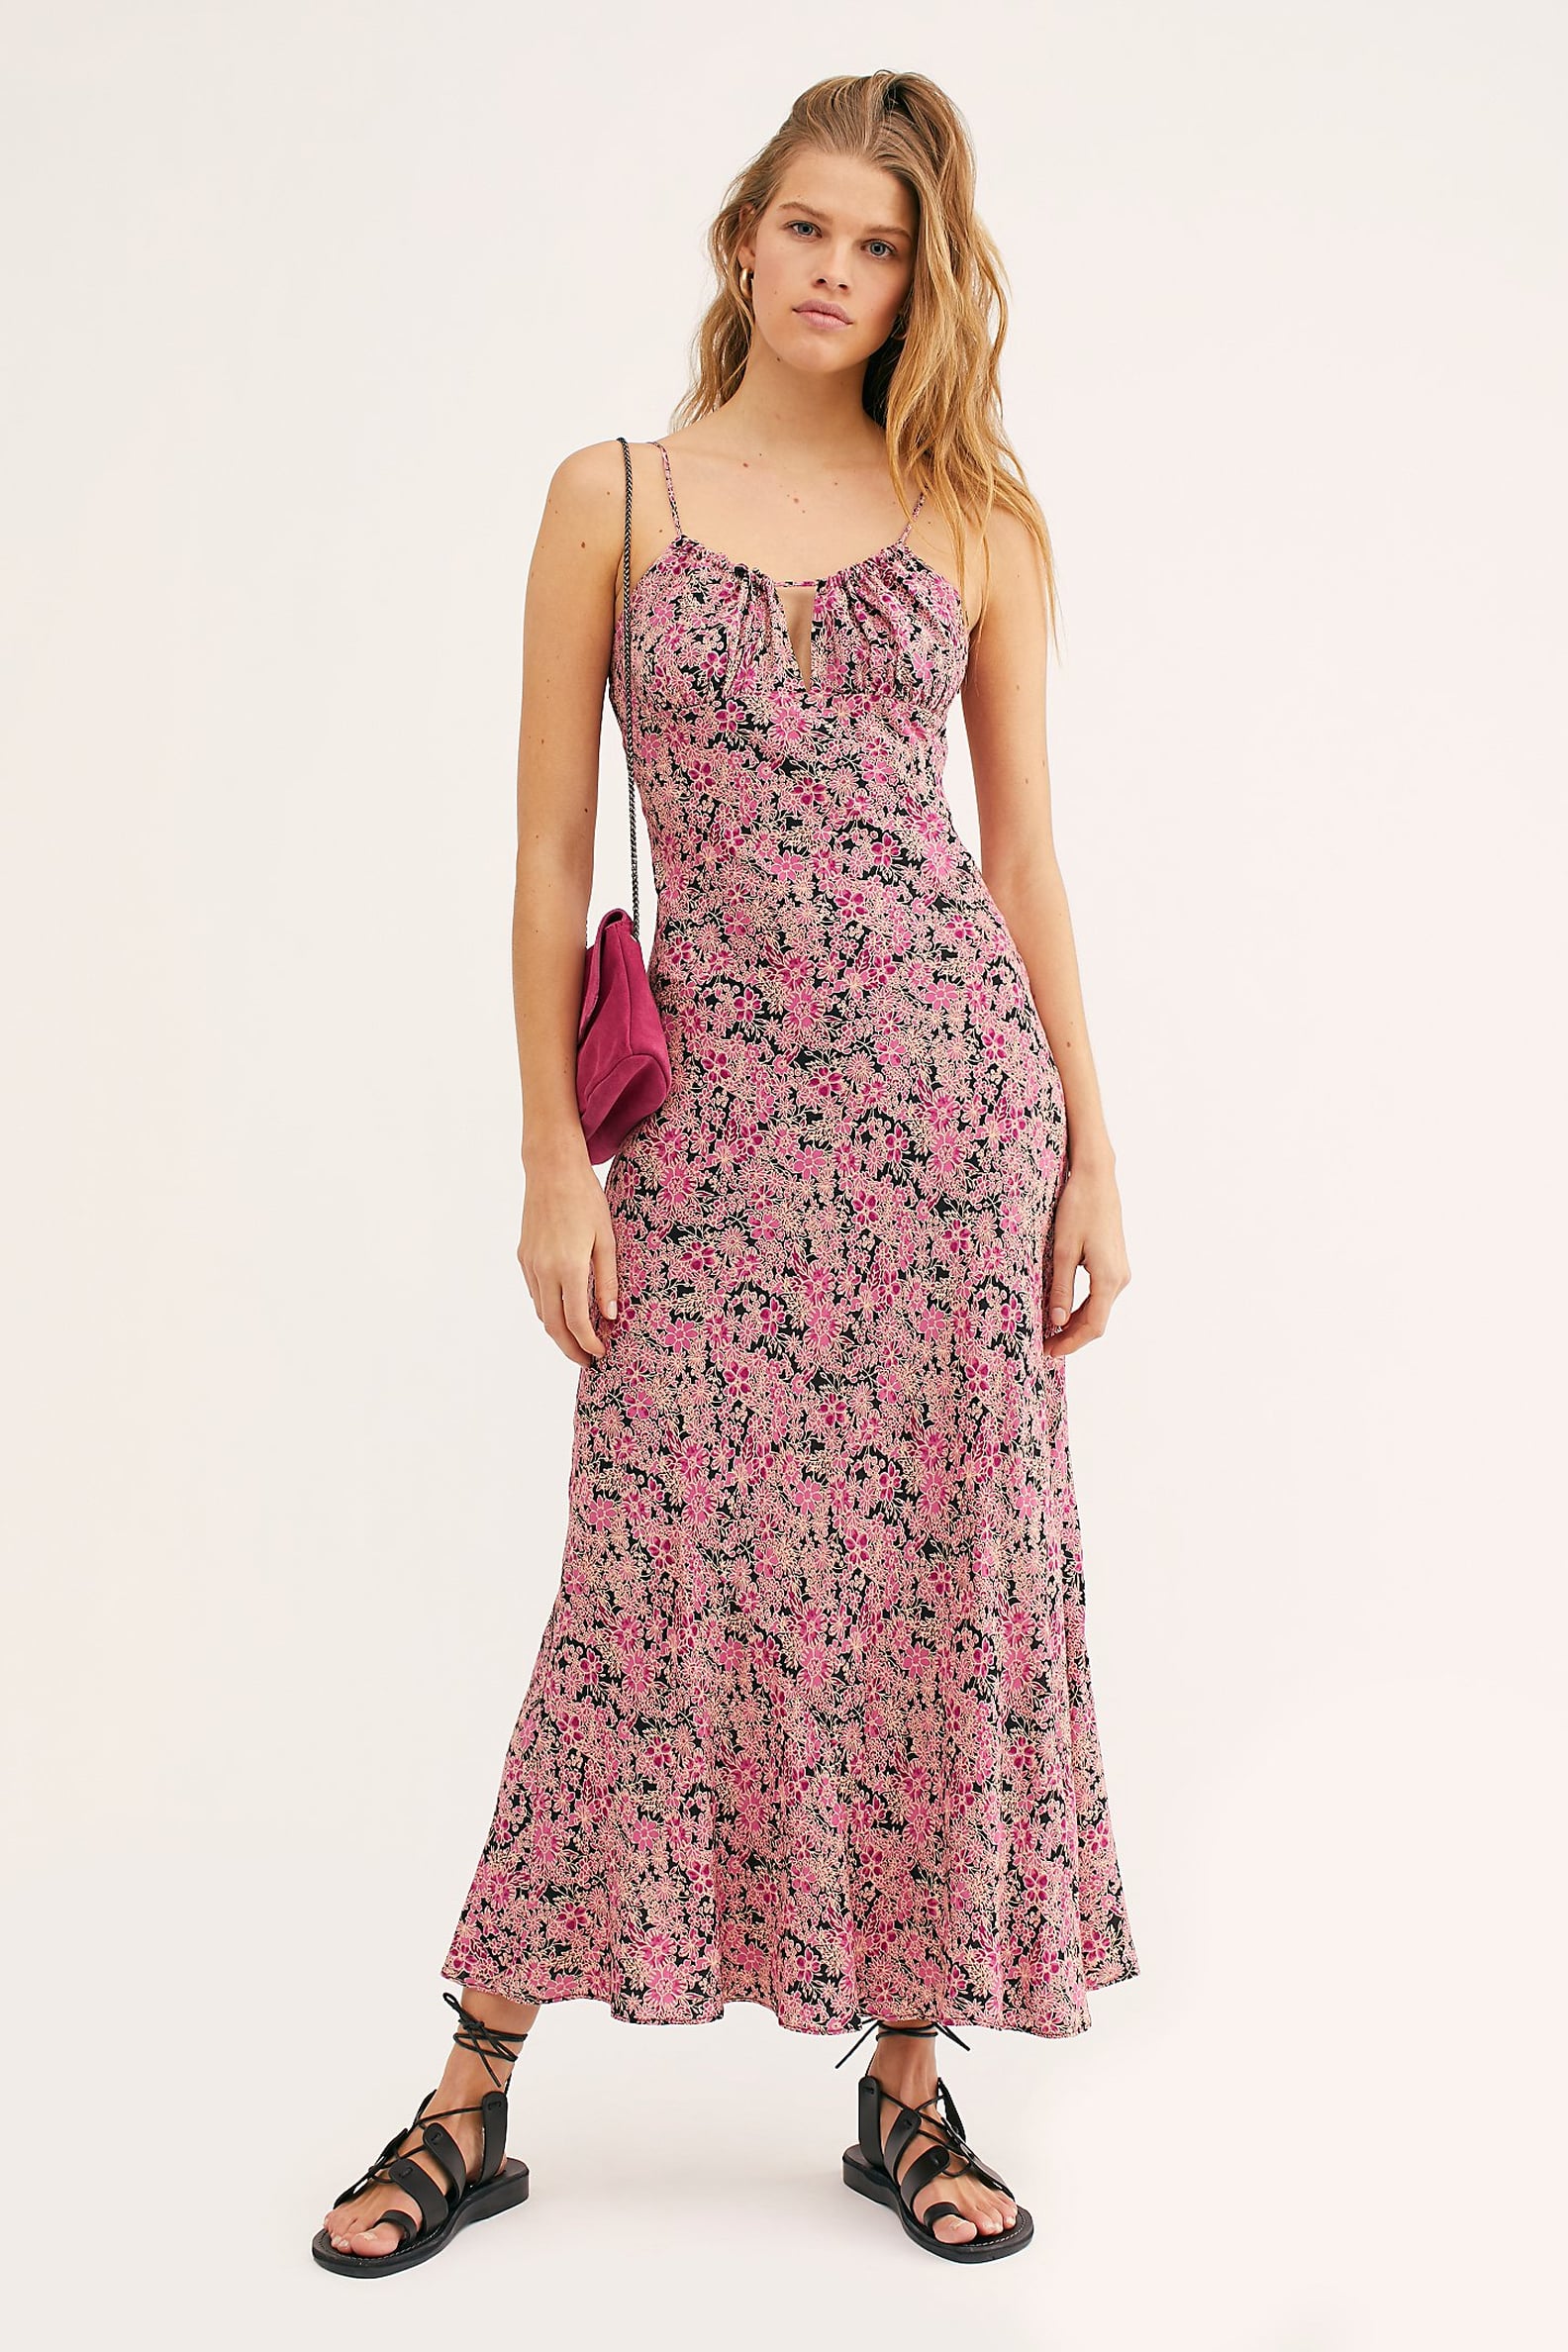 Best Free People Clothes on Sale | May 2020 | POPSUGAR Fashion